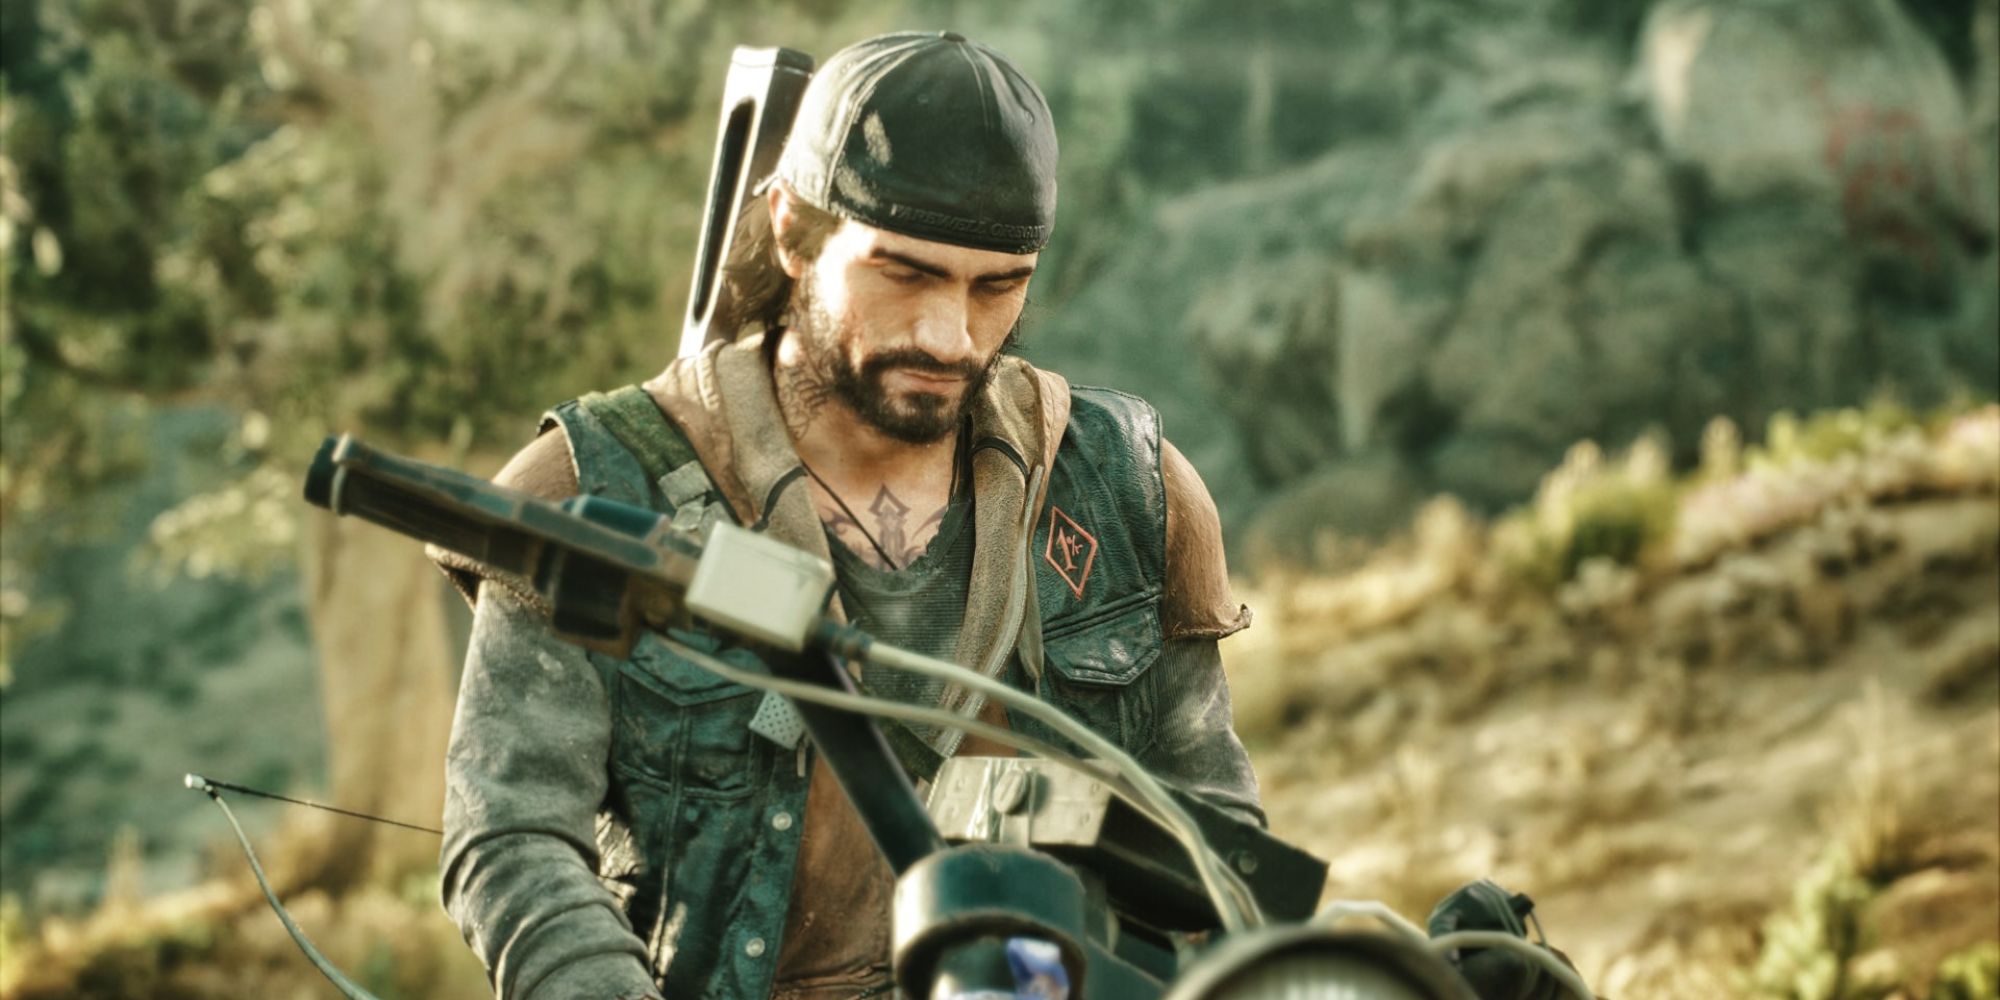 Deacon St. John, the main character of Days Gone, rests on his motorcycle.